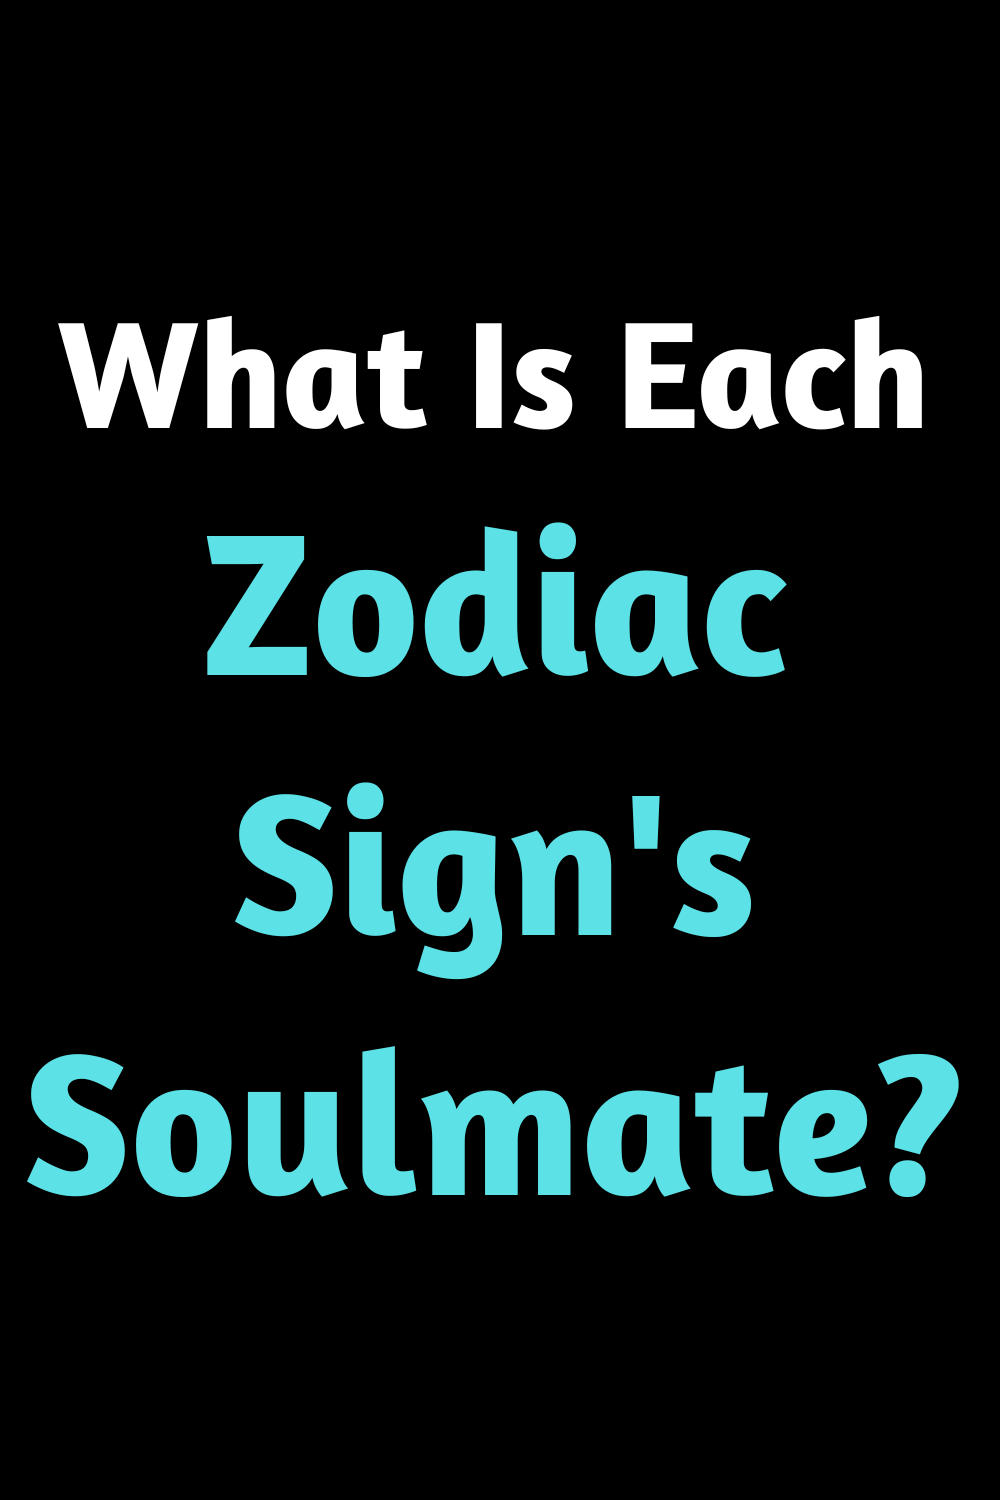 What Is Each Zodiac Sign's Soulmate?